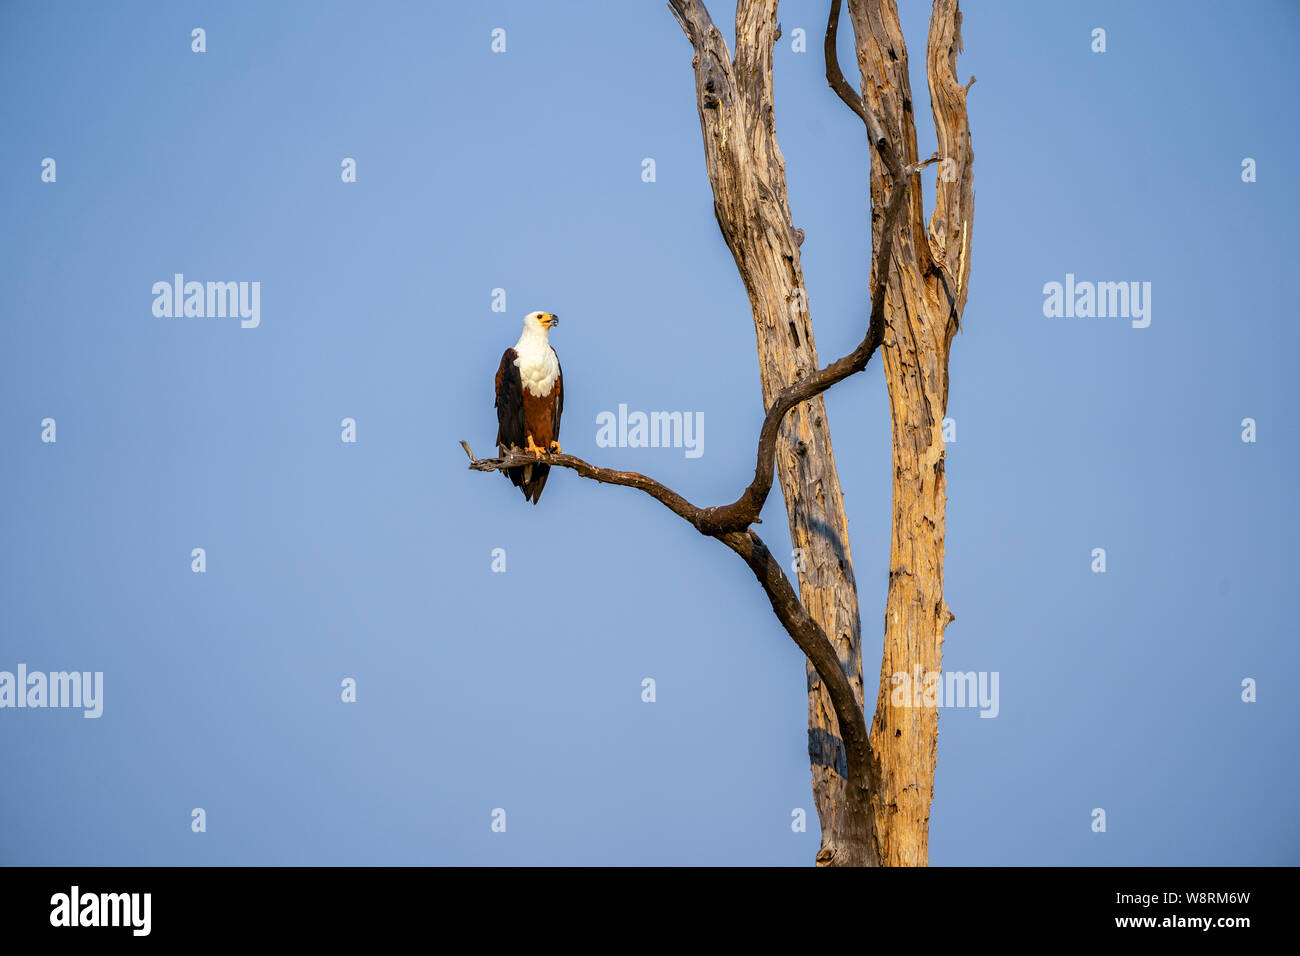 African fish eagle,Africa,African,Eagle,Fish Eagle,eagles,bird of prey,Haliaeetus vocifer,perched,perch,perching,branch,tree,endemic,blue sky,animal,a Stock Photo